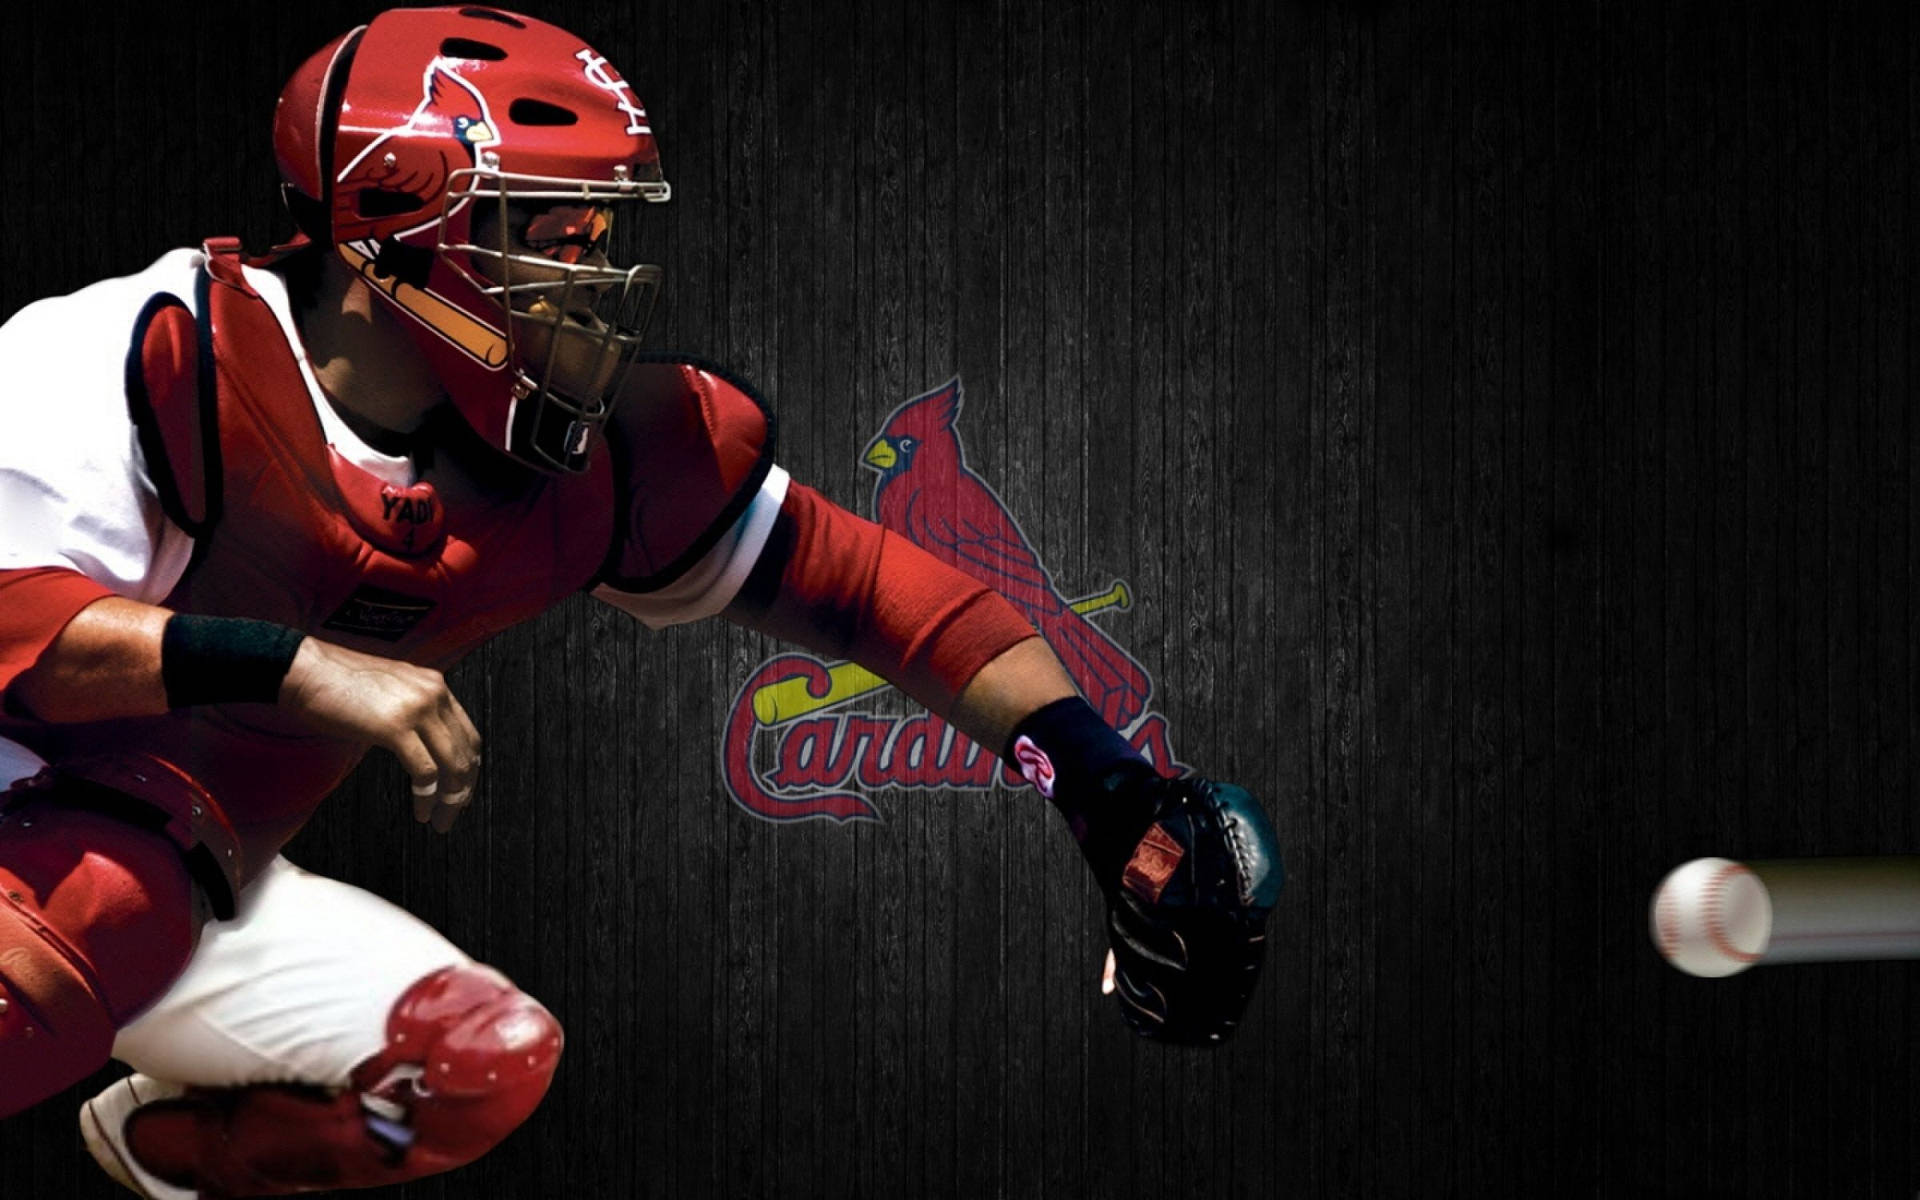 St Louis Cardinals Player On Game Background